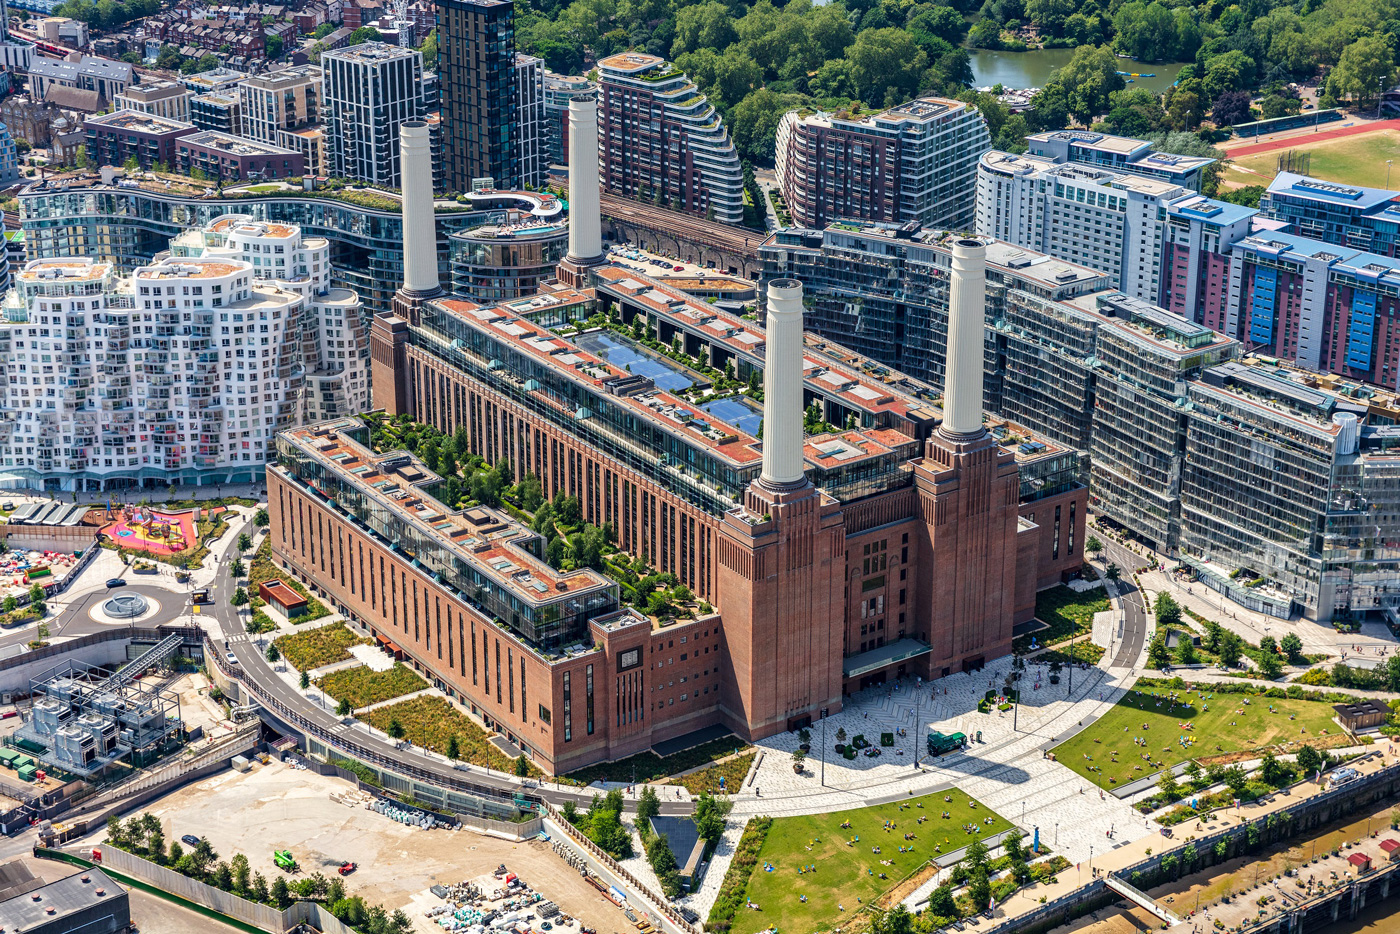 Battersea Power Station is the only UK destination to feature on the culture list. (Credit: High Level Photography)